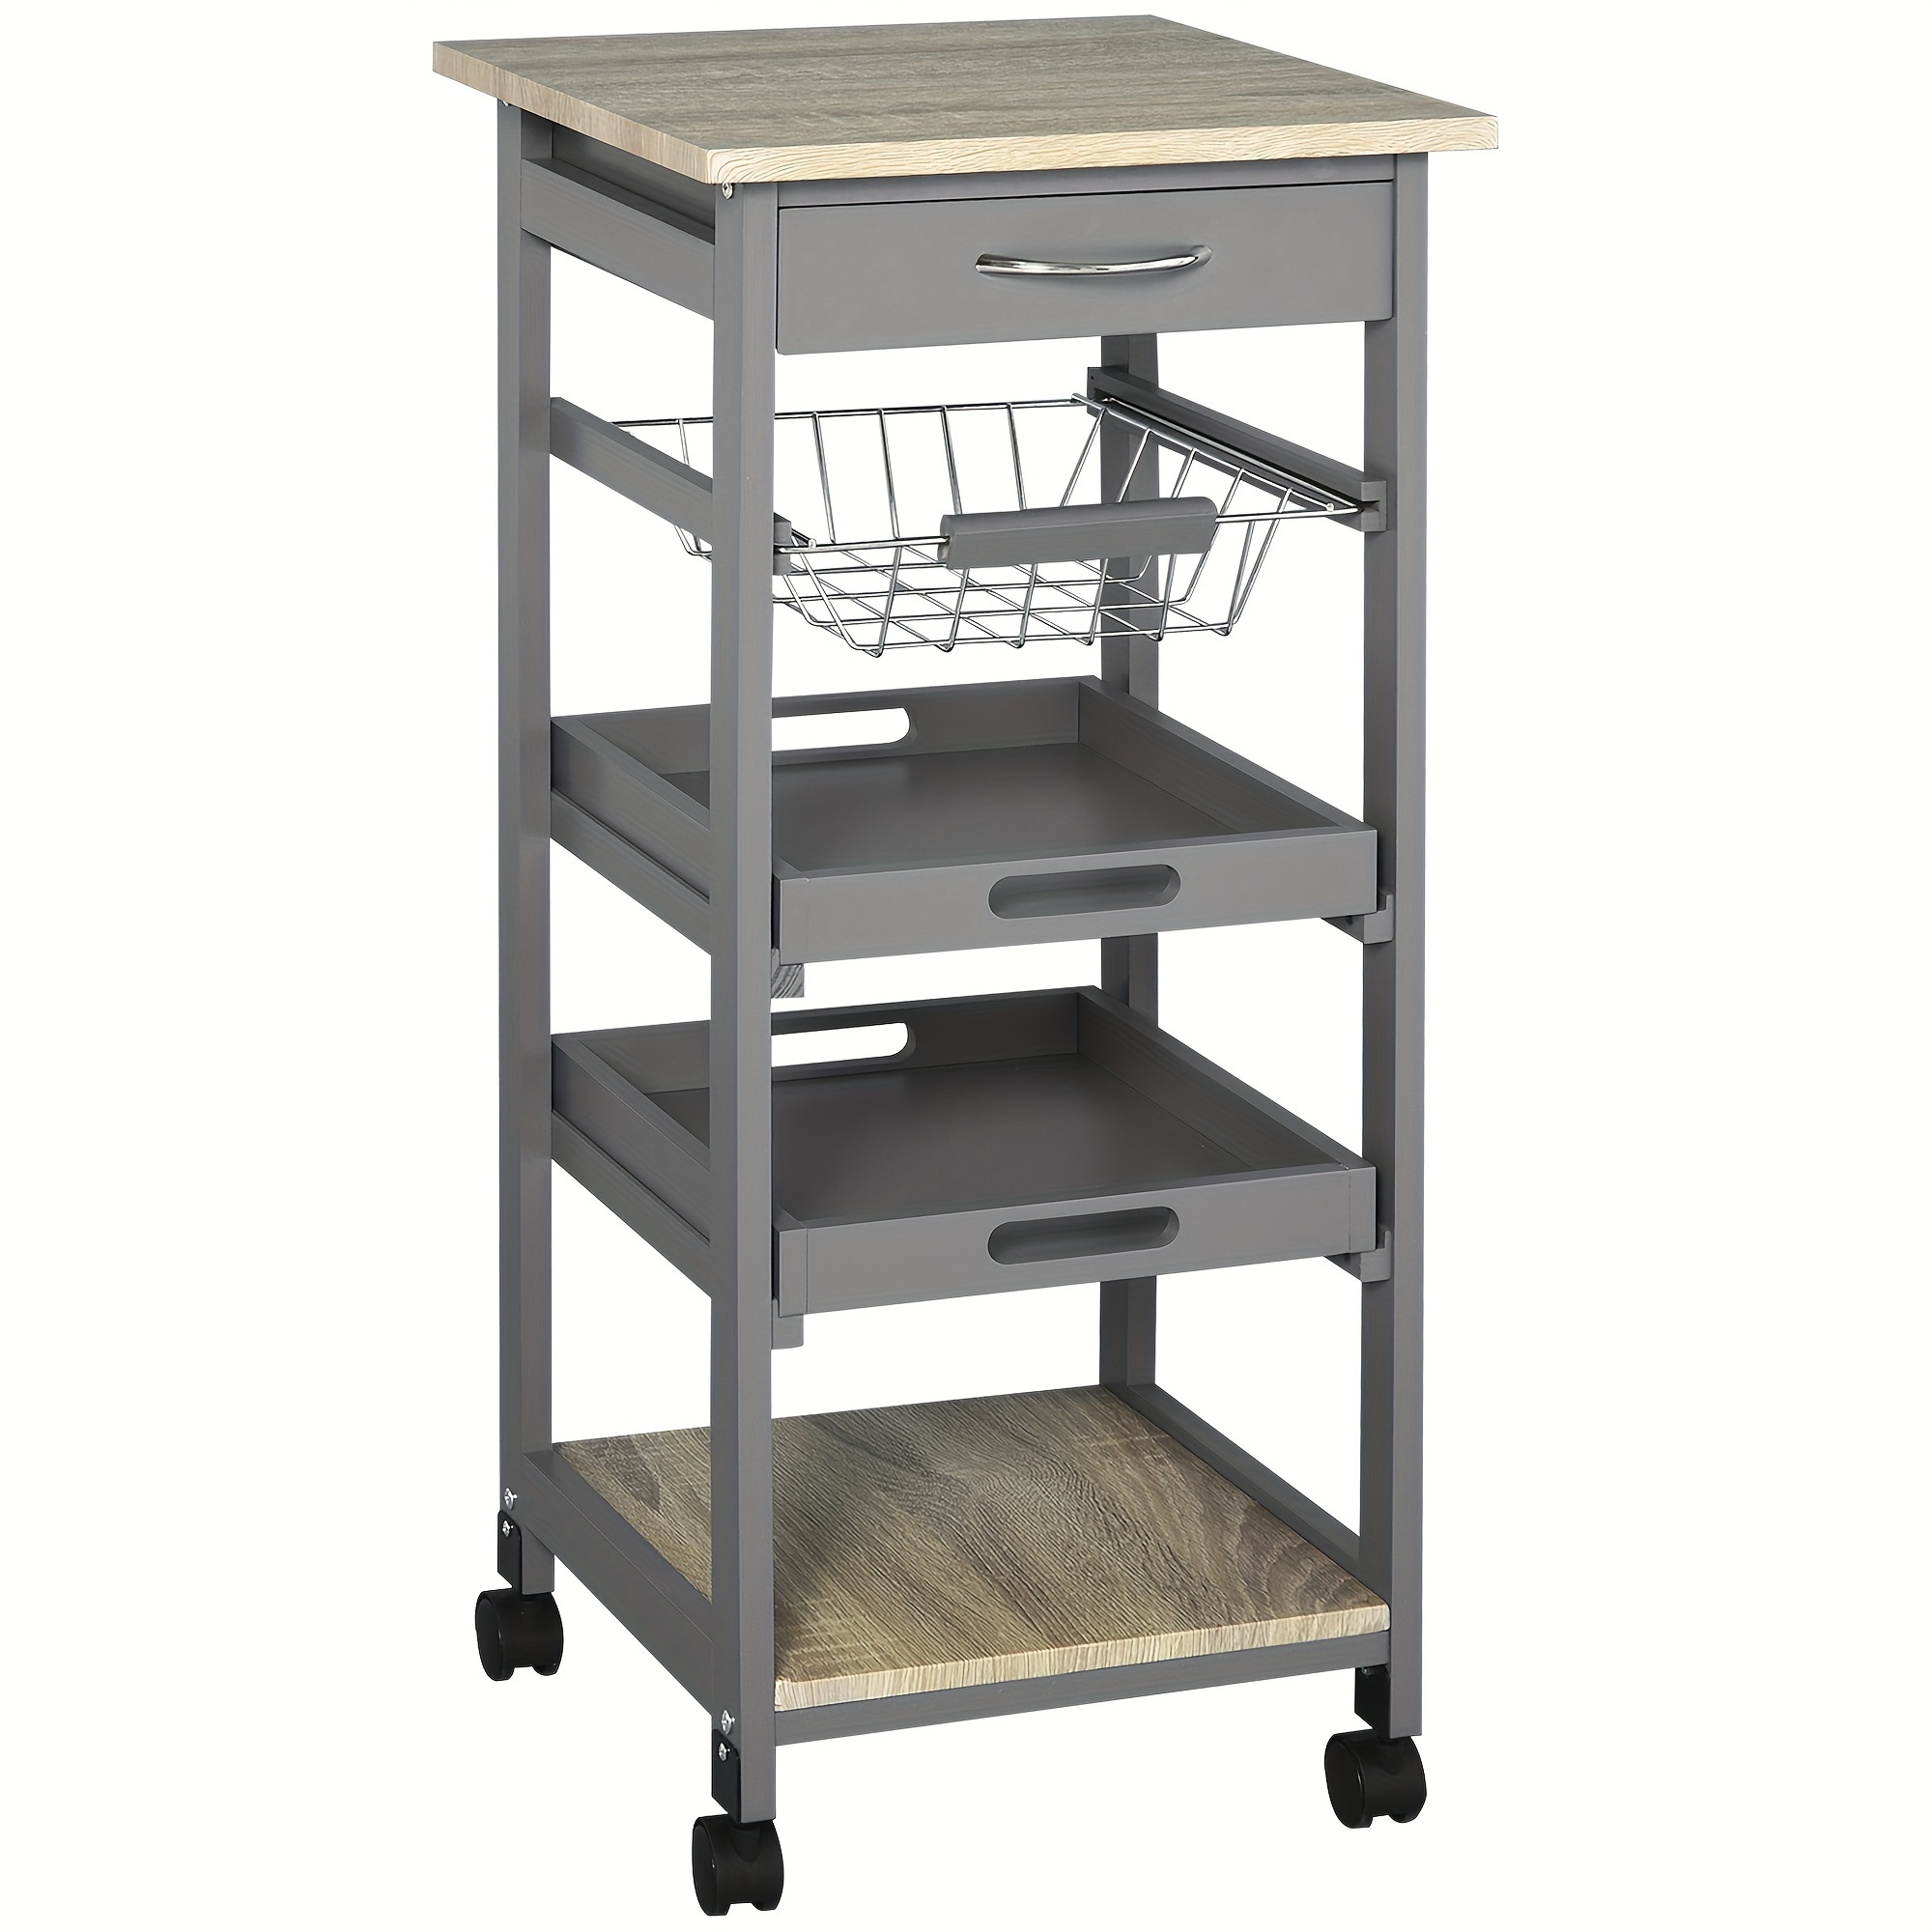 

Mobile Kitchen Cart, Rolling Kitchen Island With Storage, Solid Wood Frame Utility Cart With Wire Fruit Baskets, Trays And Drawer, Gray